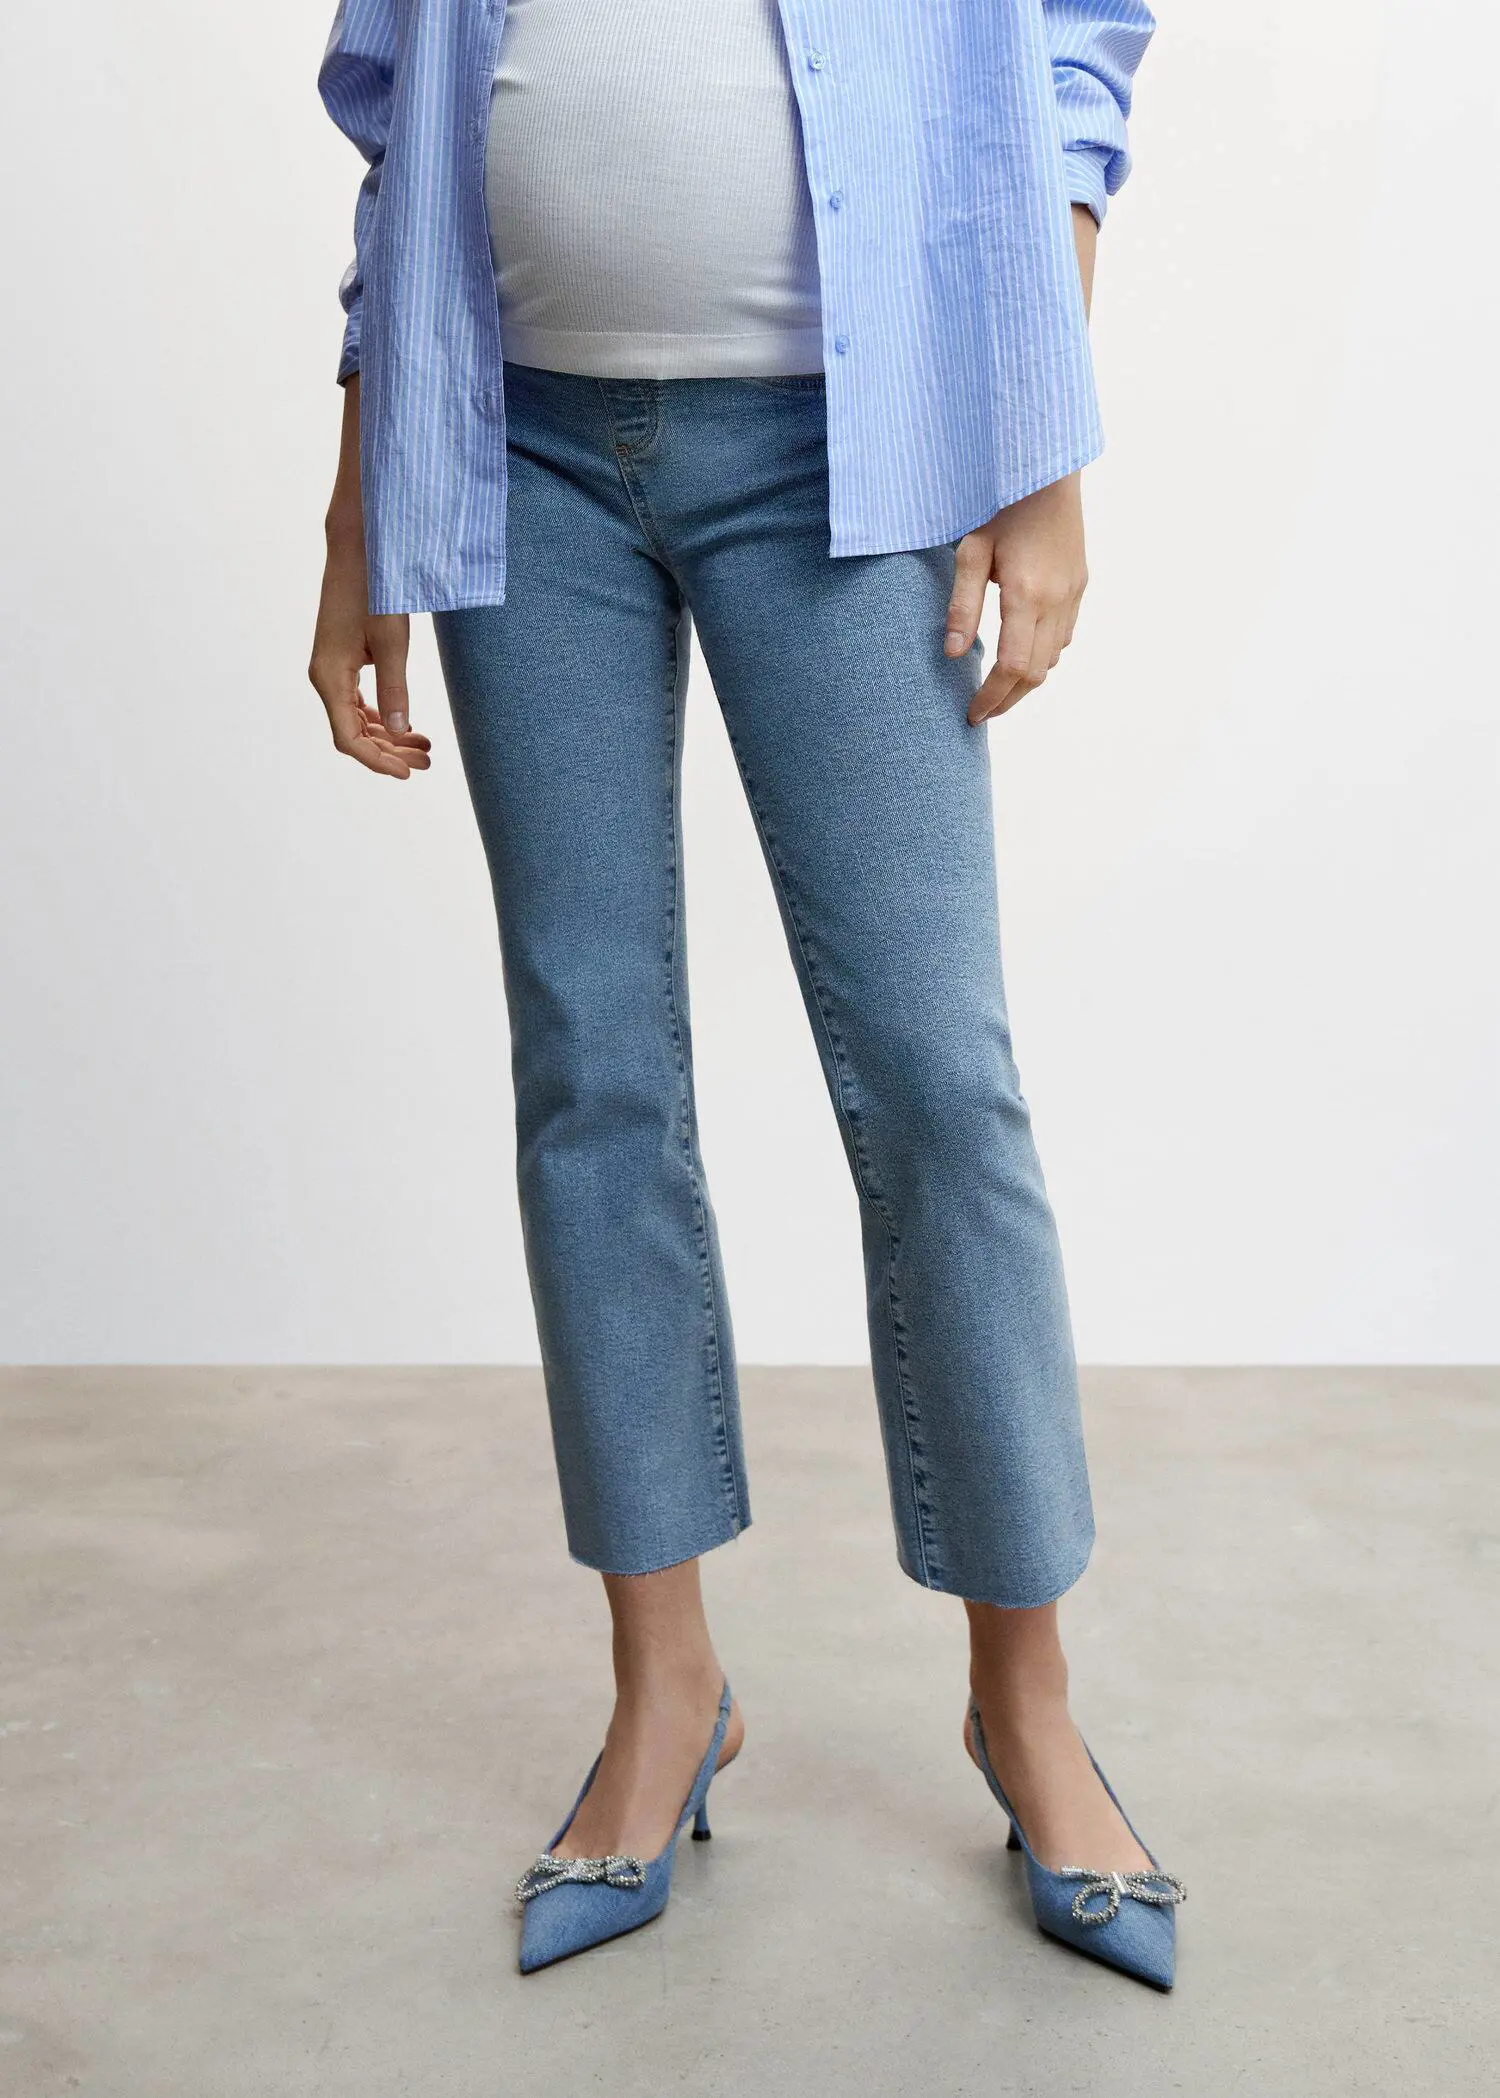 Mango Maternity flared cropped jeans. a person standing in front of a white wall. 